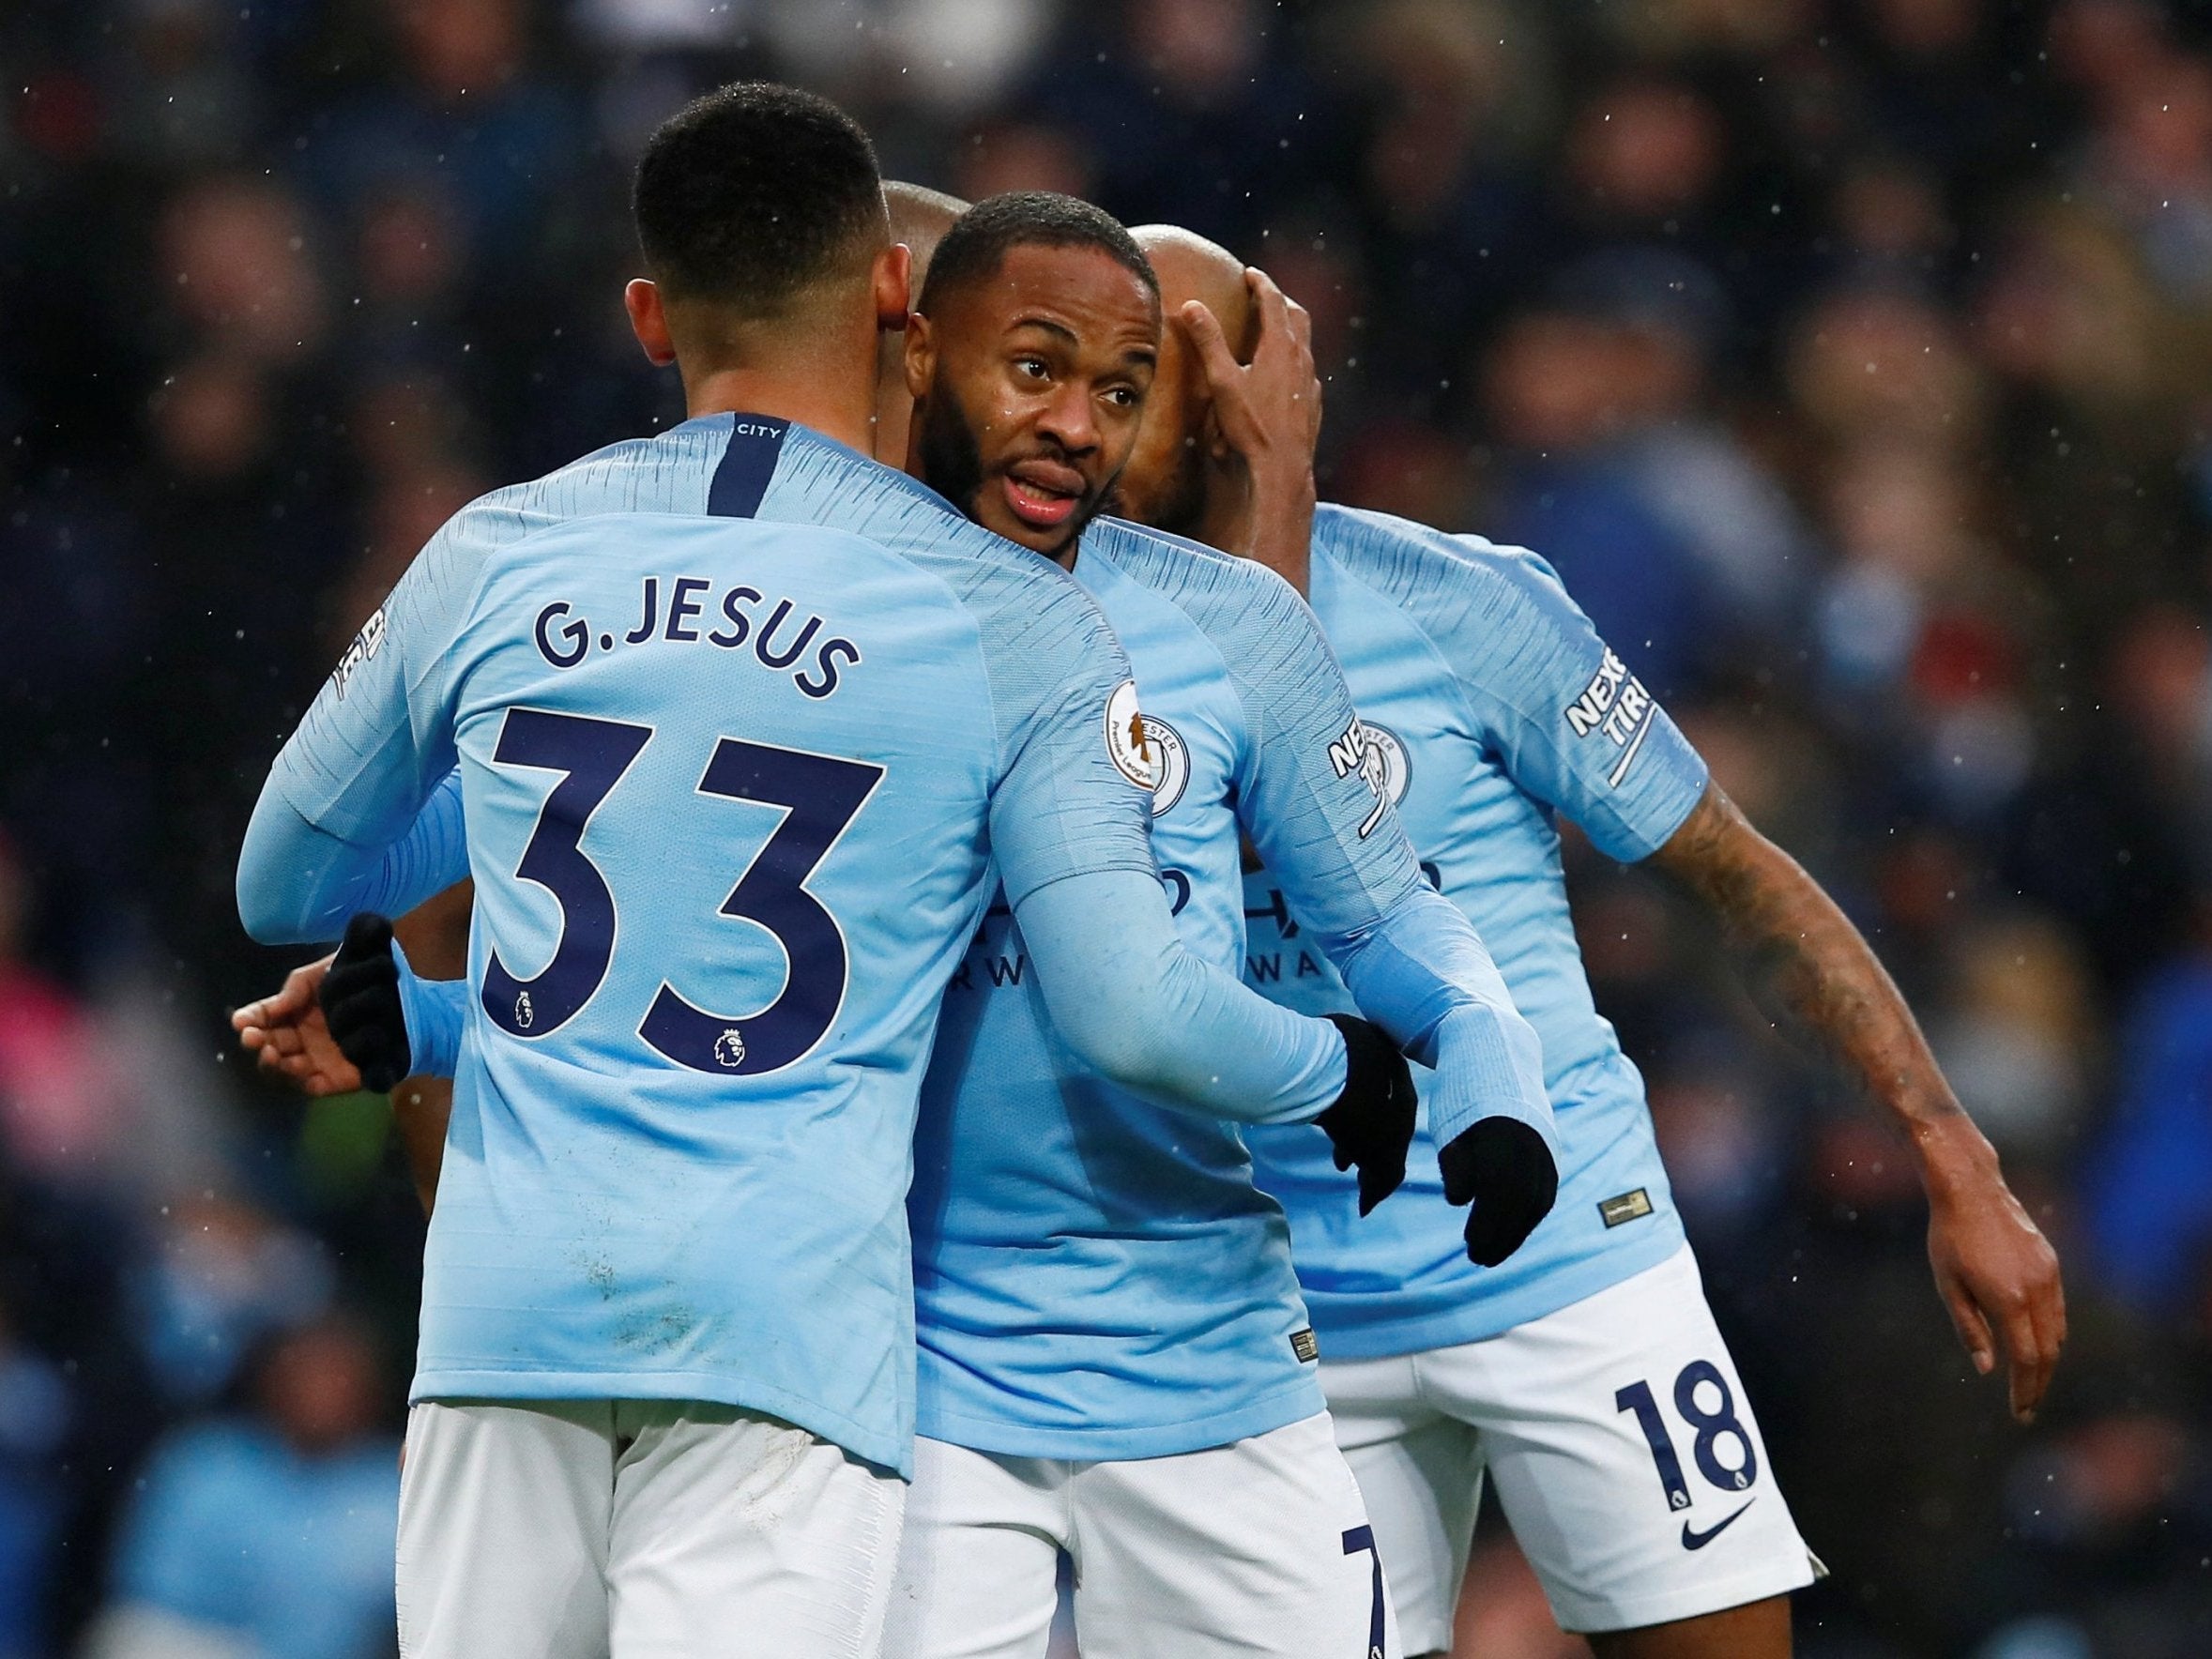 Raheem Sterling came off the bench to score City's third goal